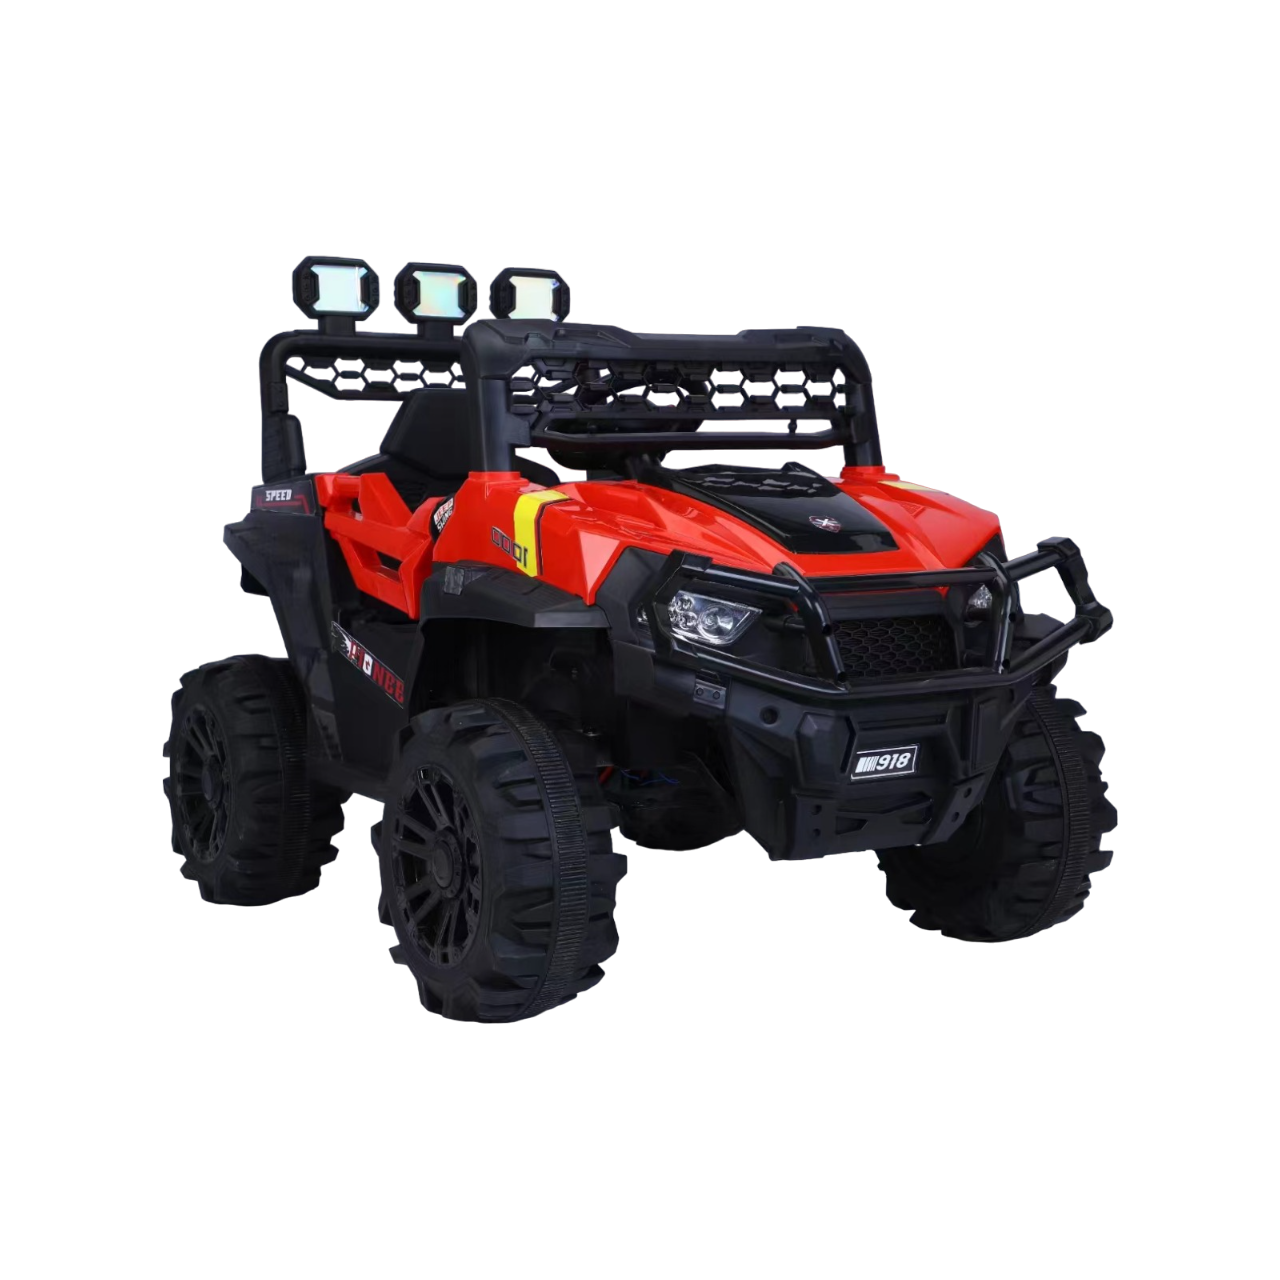 Pibi 4 x4 Single Seater SUV Truck Ride On with Remote Control 909 Red Age- 2 Years & Above 